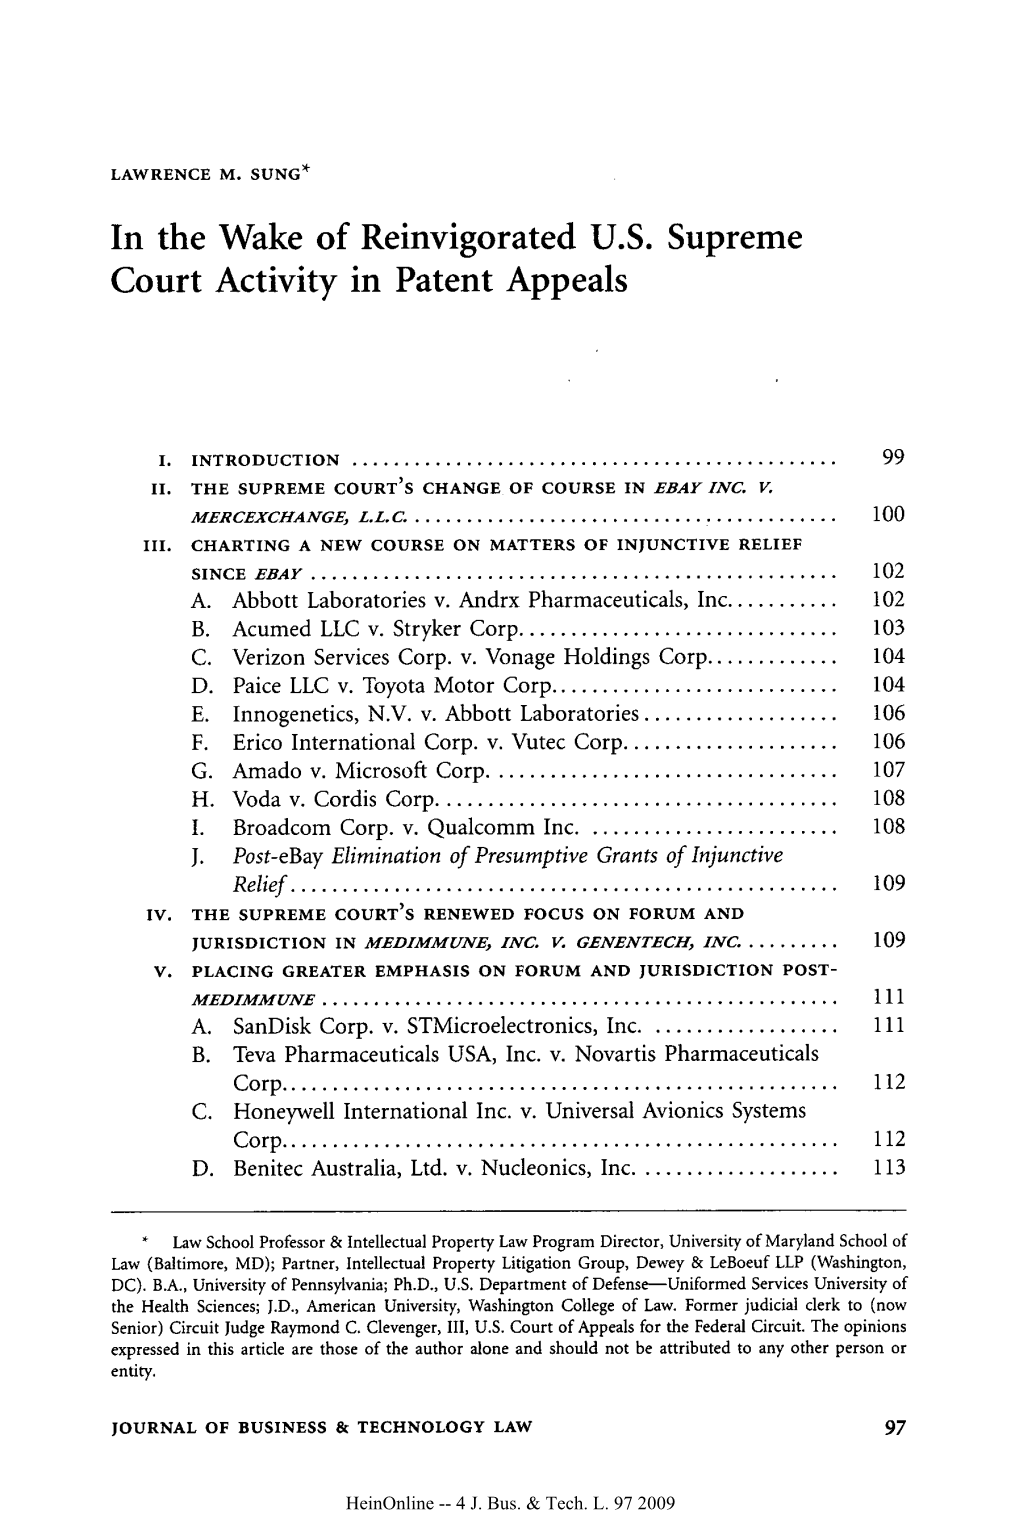 In the Wake of Reinvigorated U.S. Supreme Court Activity in Patent Appeals